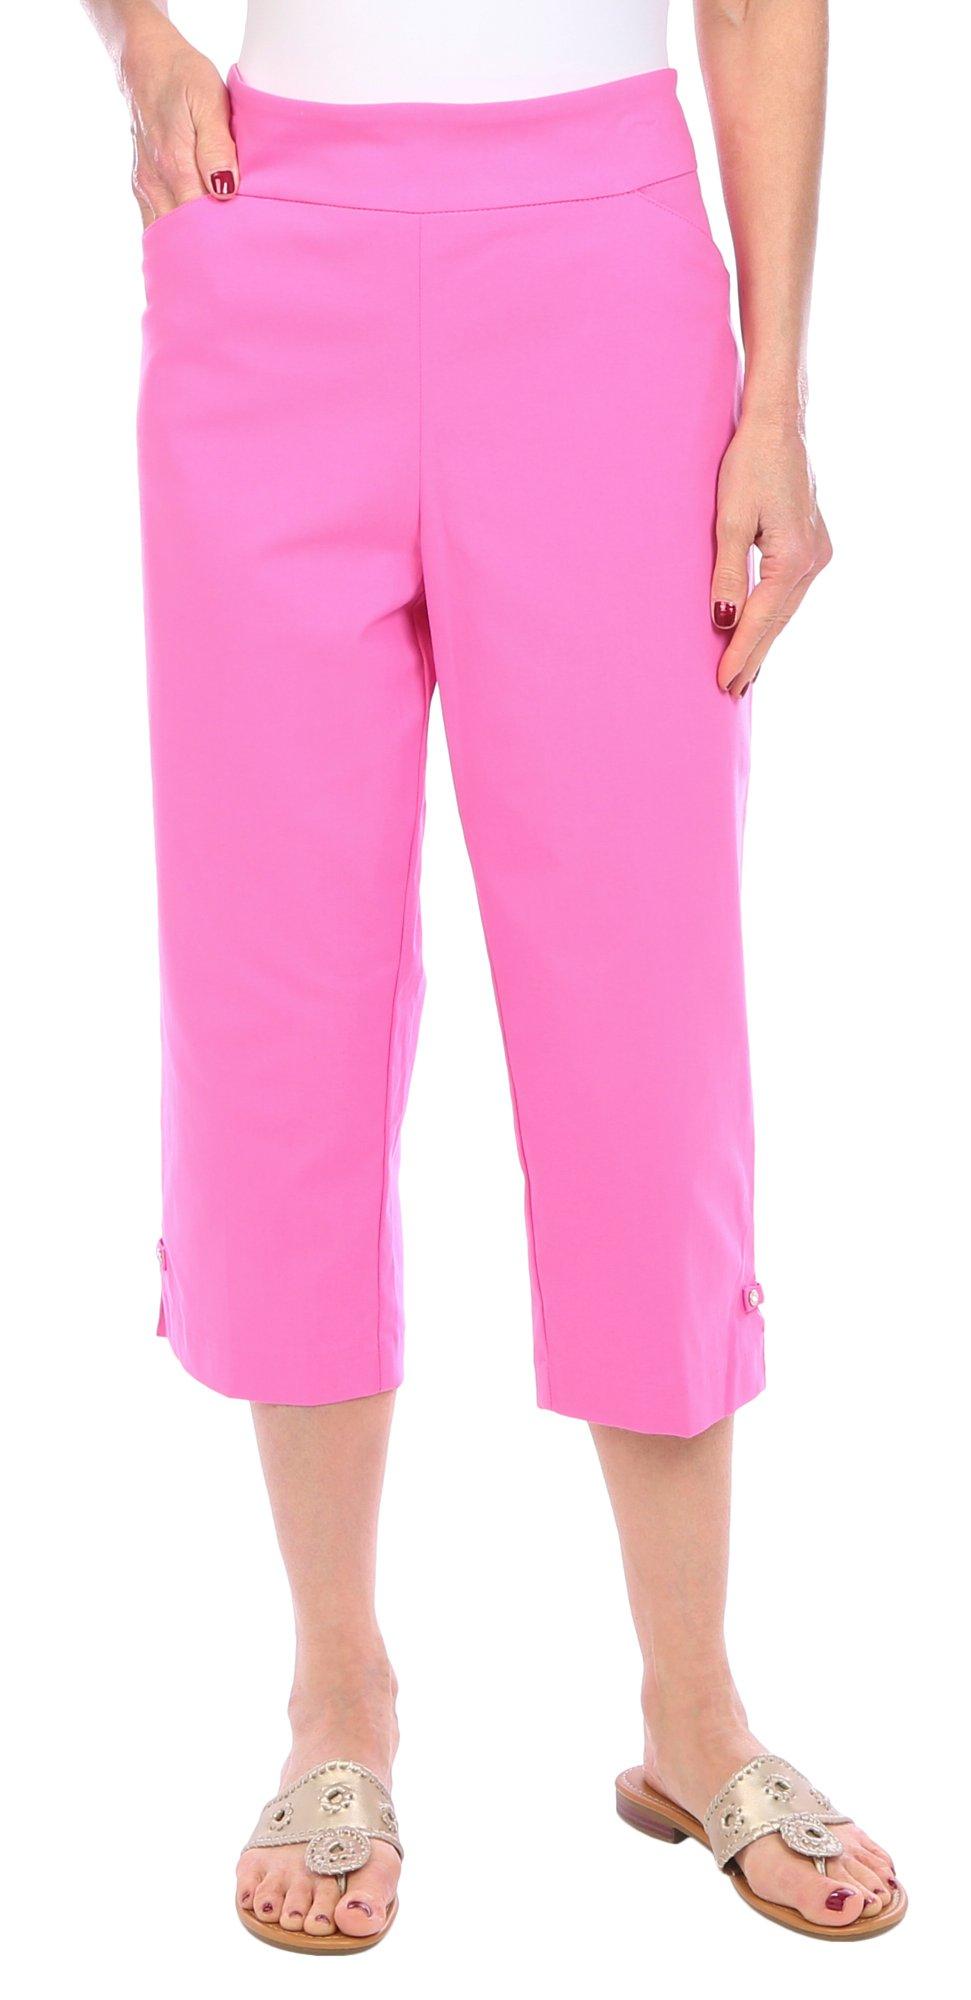 Coral Bay Womens 21 in. Solid Capris